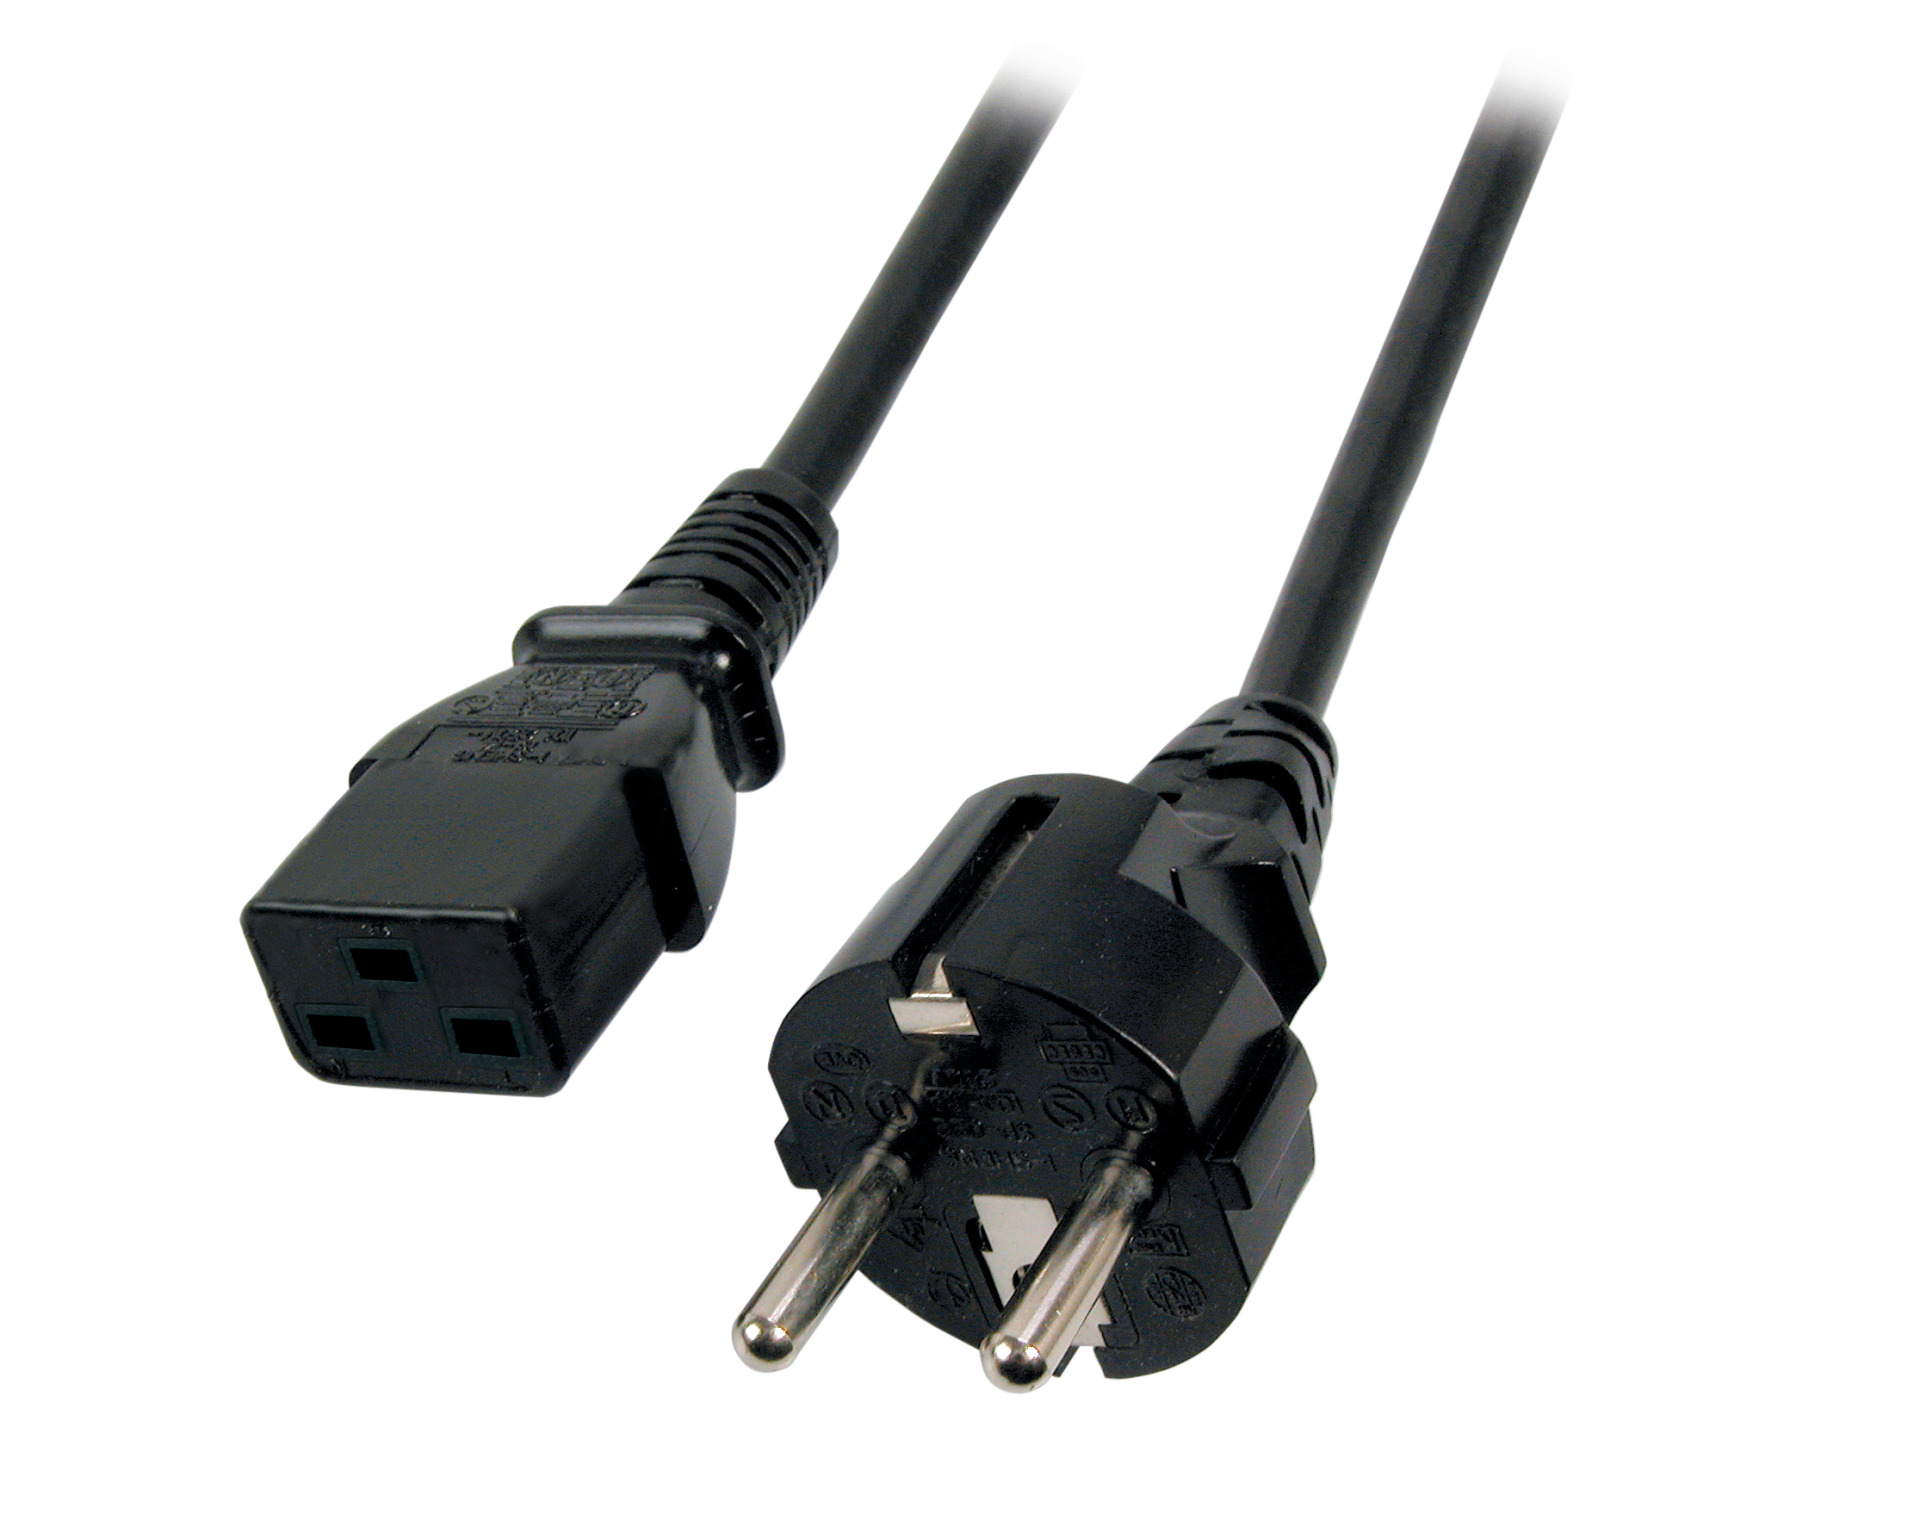 Power Cable CEE7/7 180° - C19 180°, Black, 3.0 m, 3 x 1.50 mm²